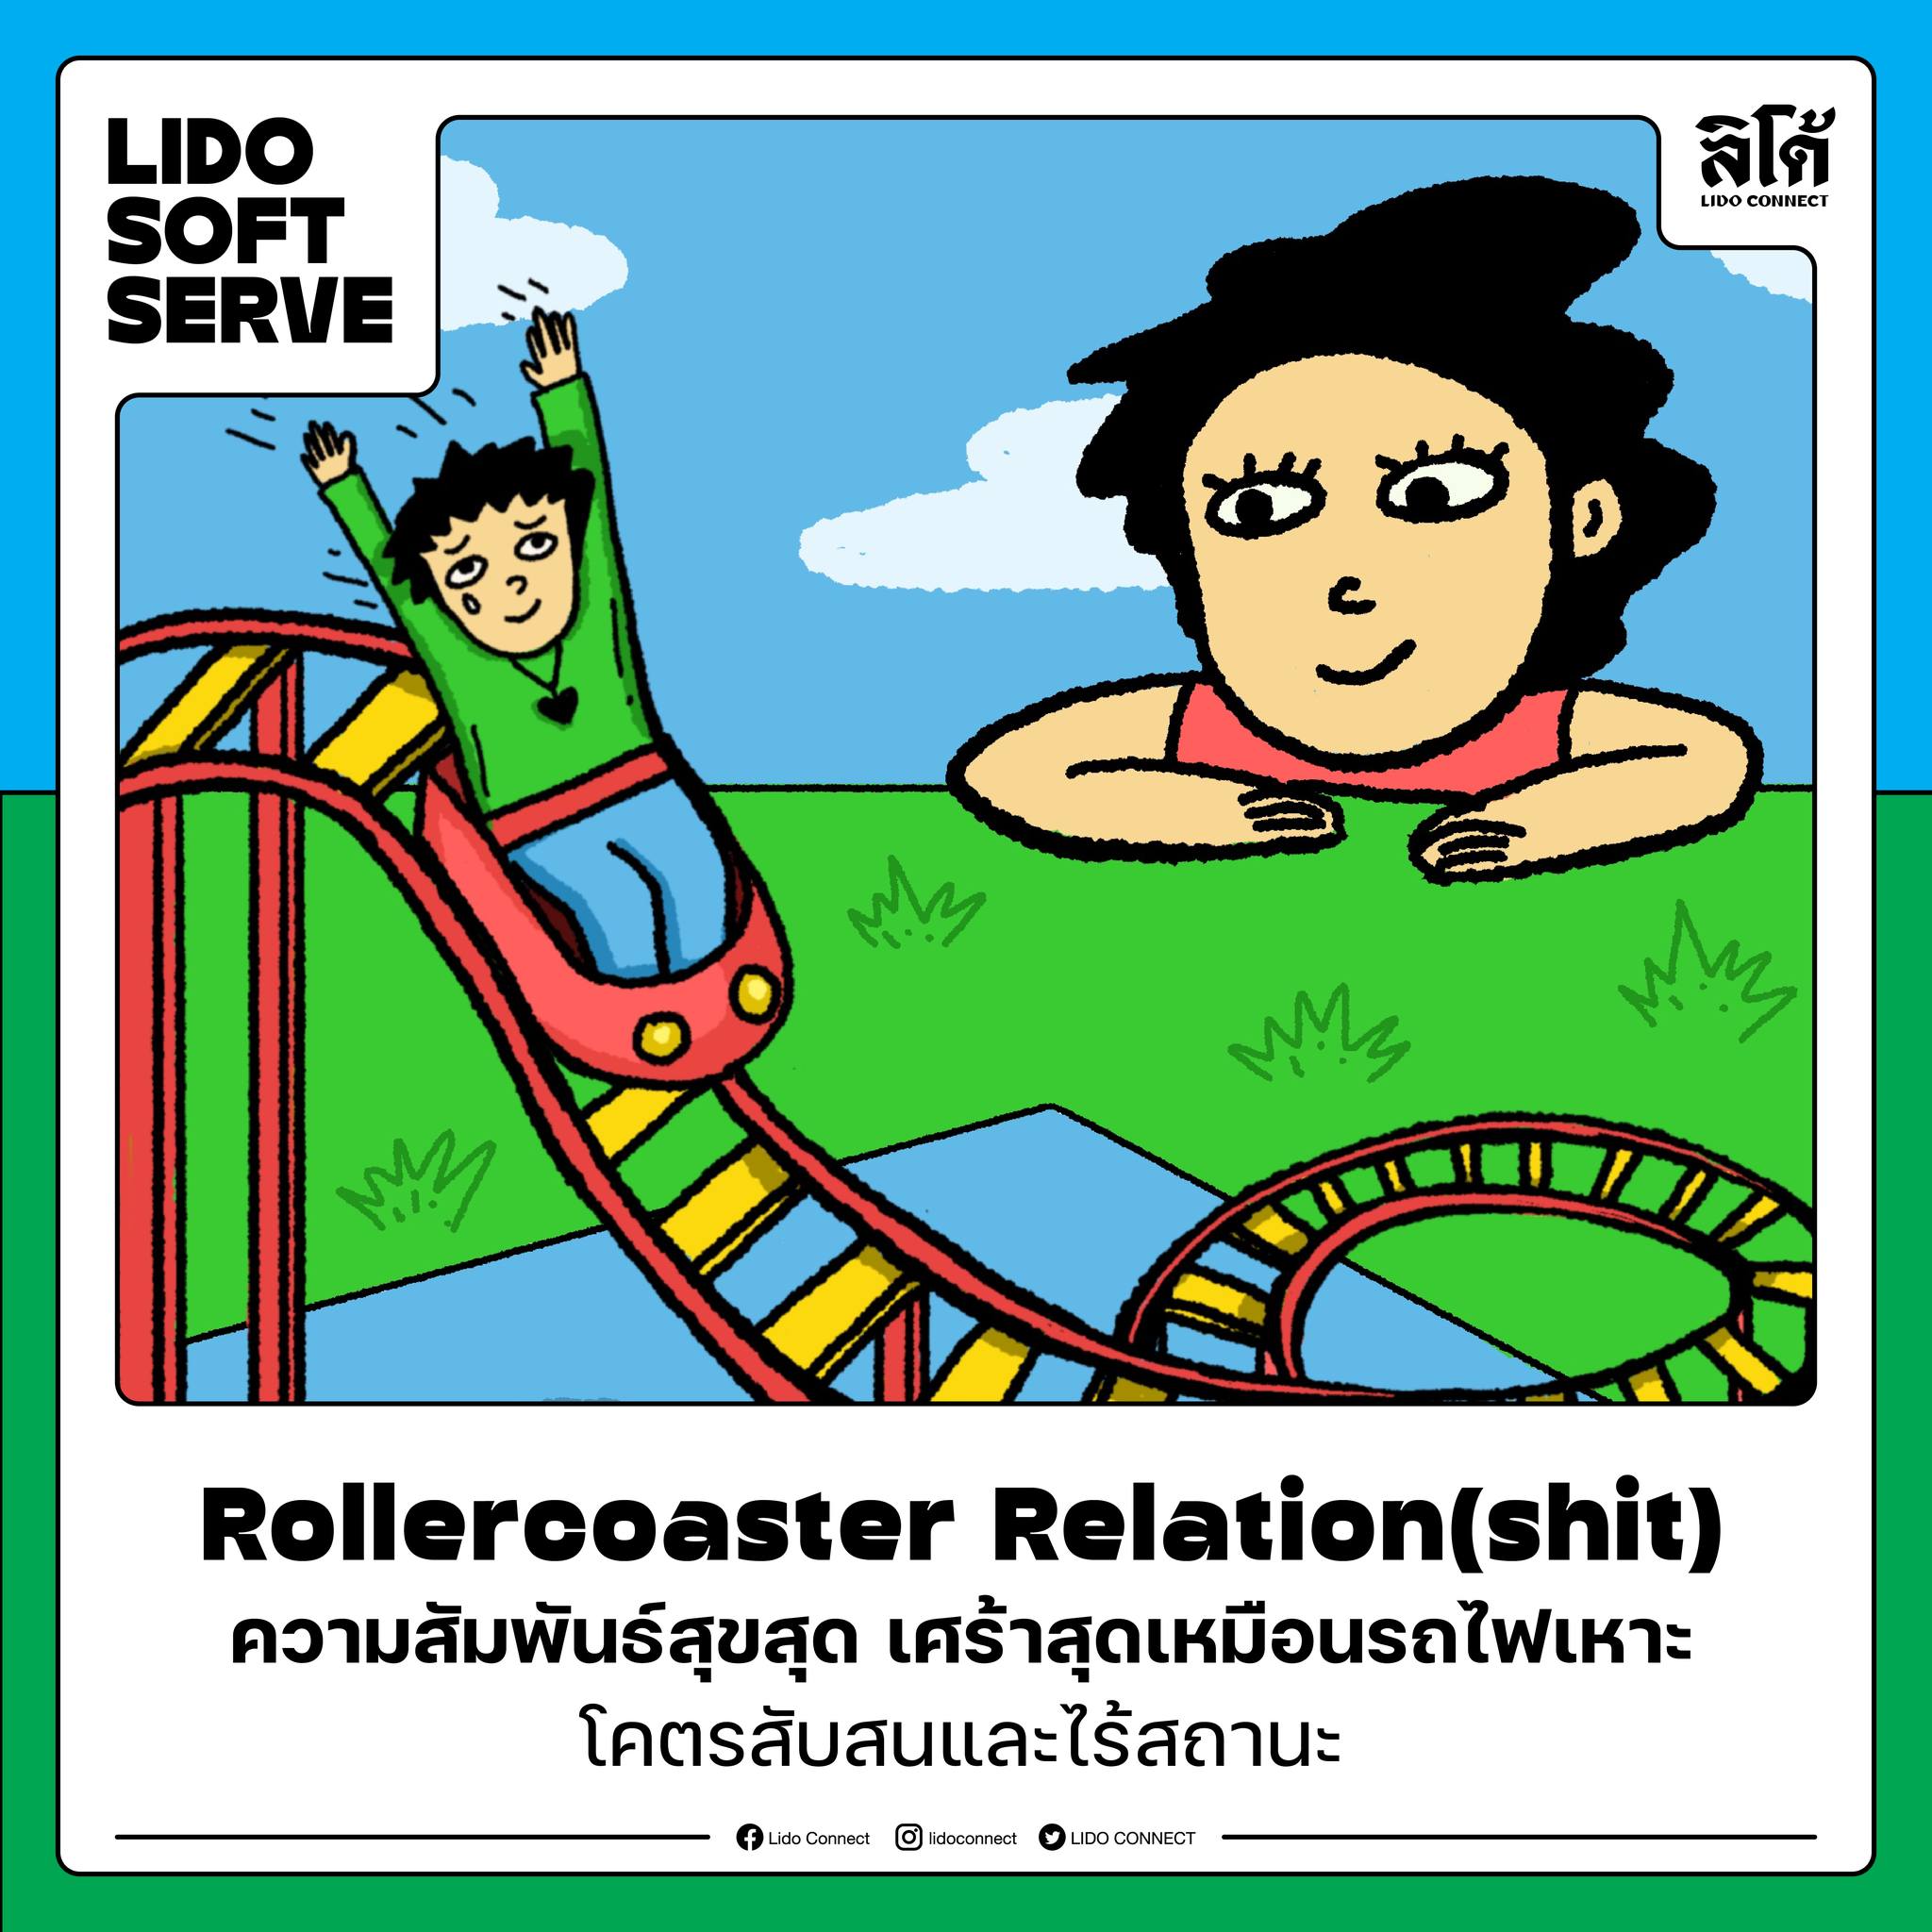 Rollercoaster Relation(shit)